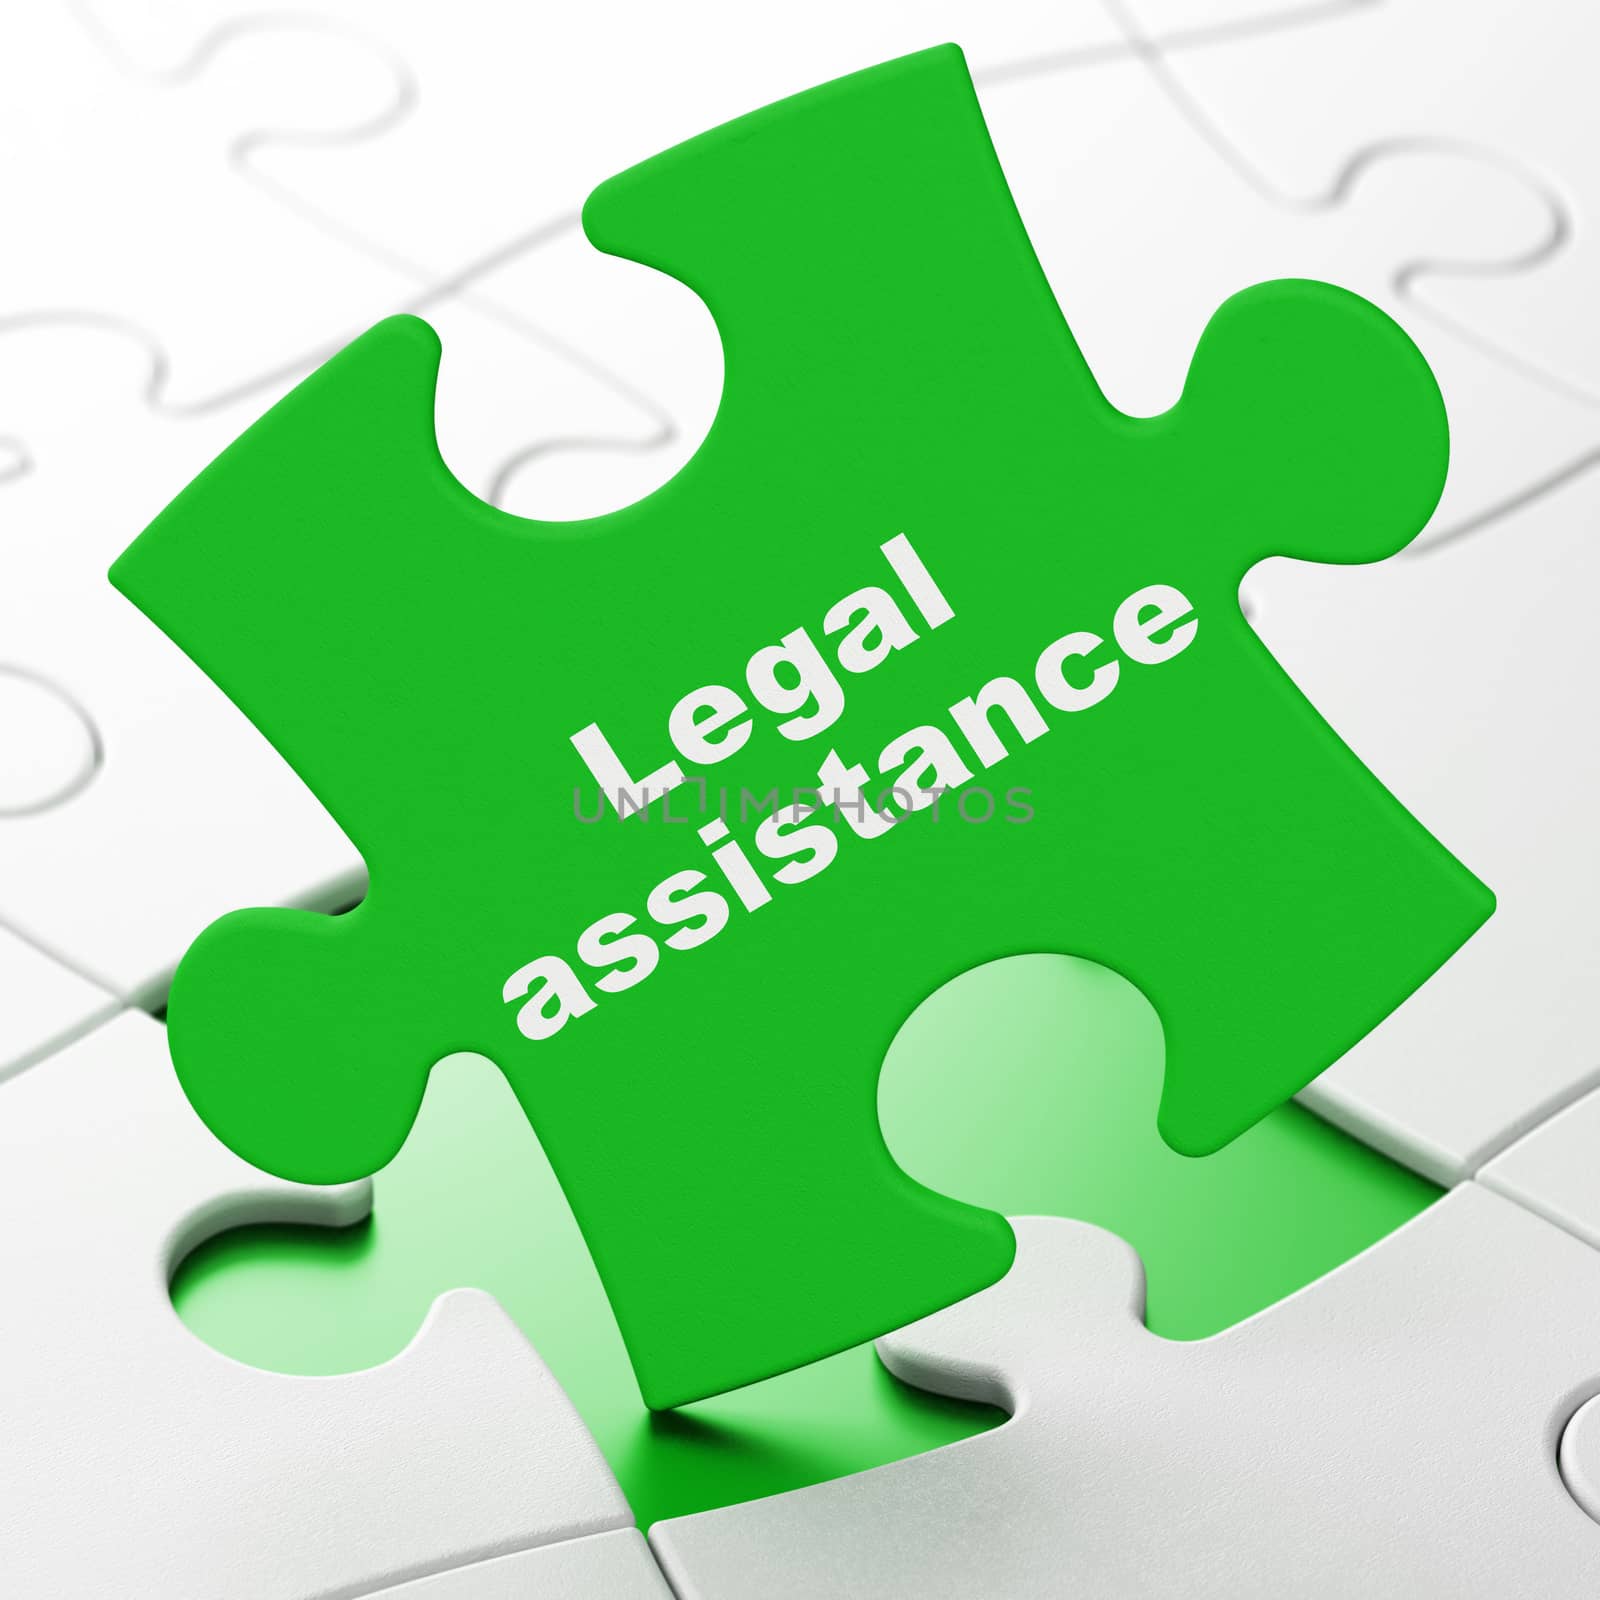 Law concept: Legal Assistance on Green puzzle pieces background, 3D rendering